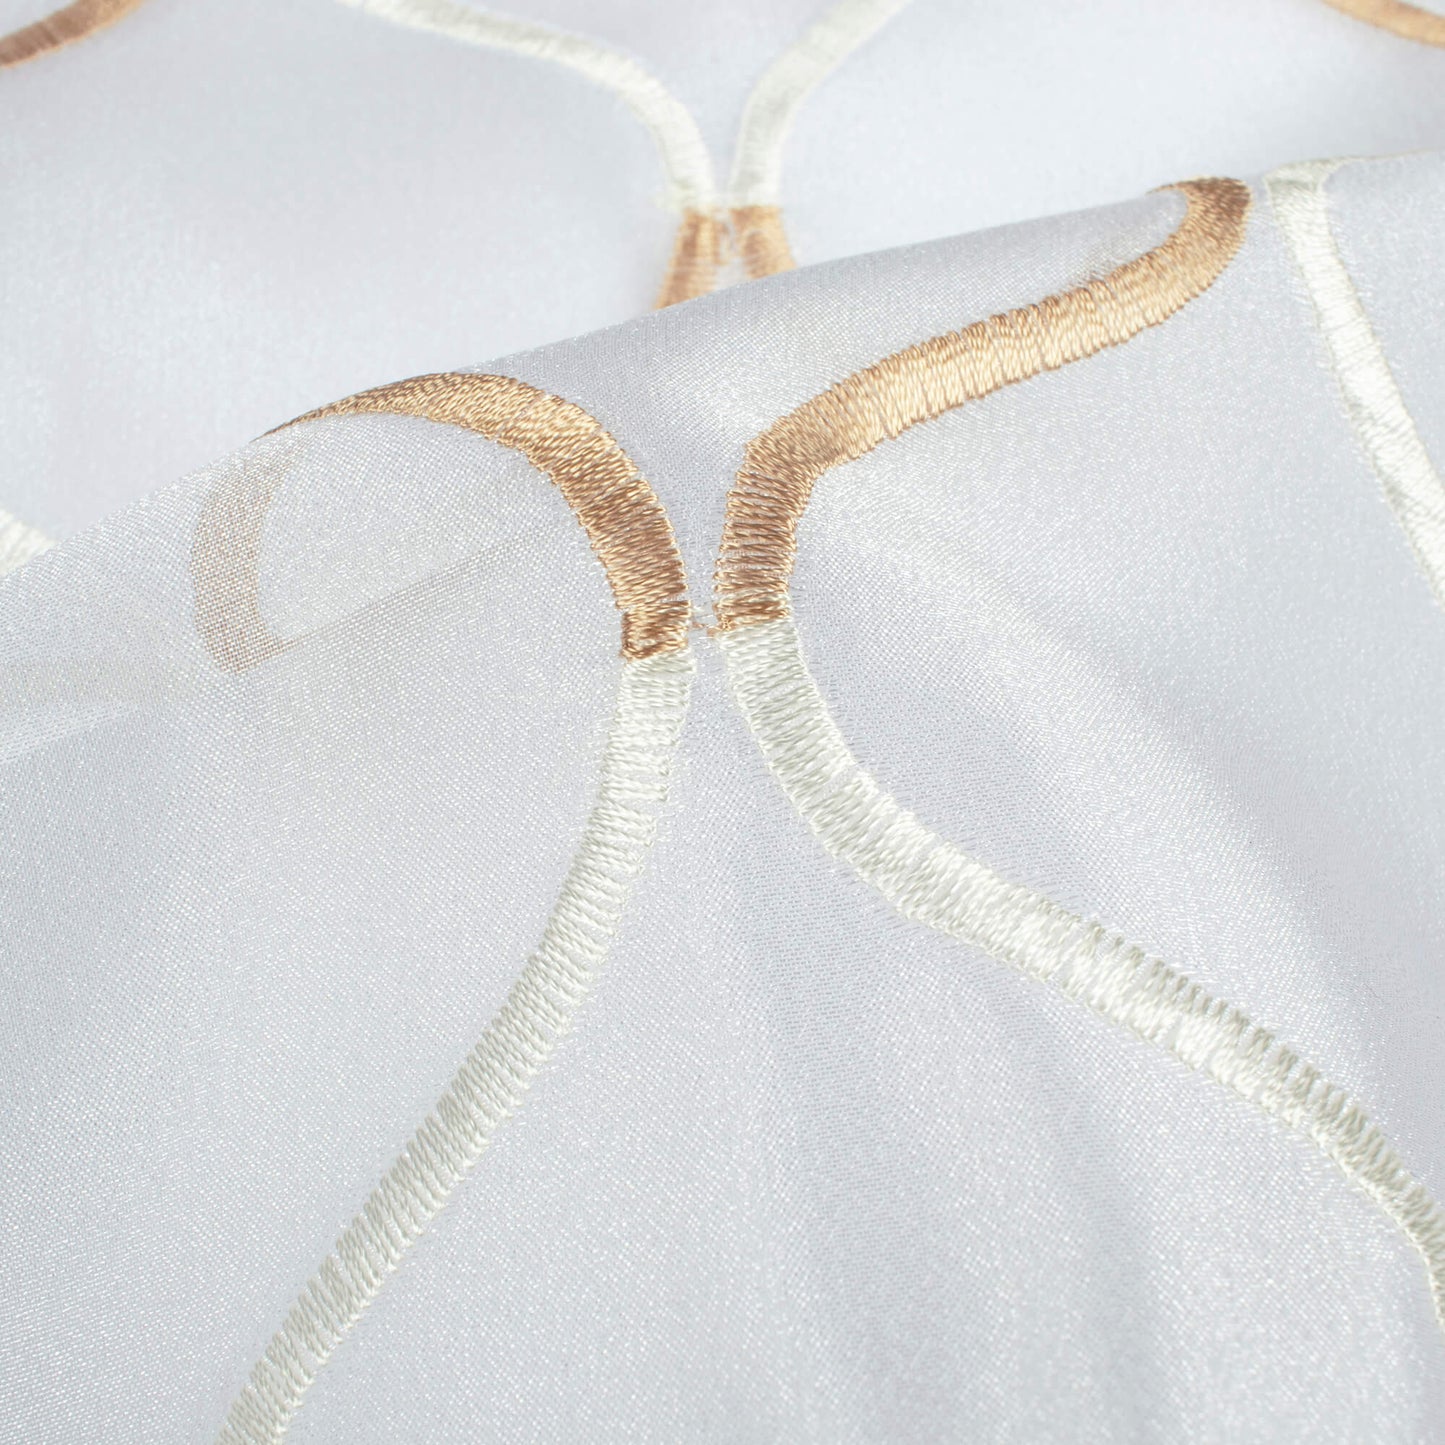 White And Tan Brown Trellis Pattern Embroidery Organza Tissue Premium Sheer Fabric (Width 48 Inches)